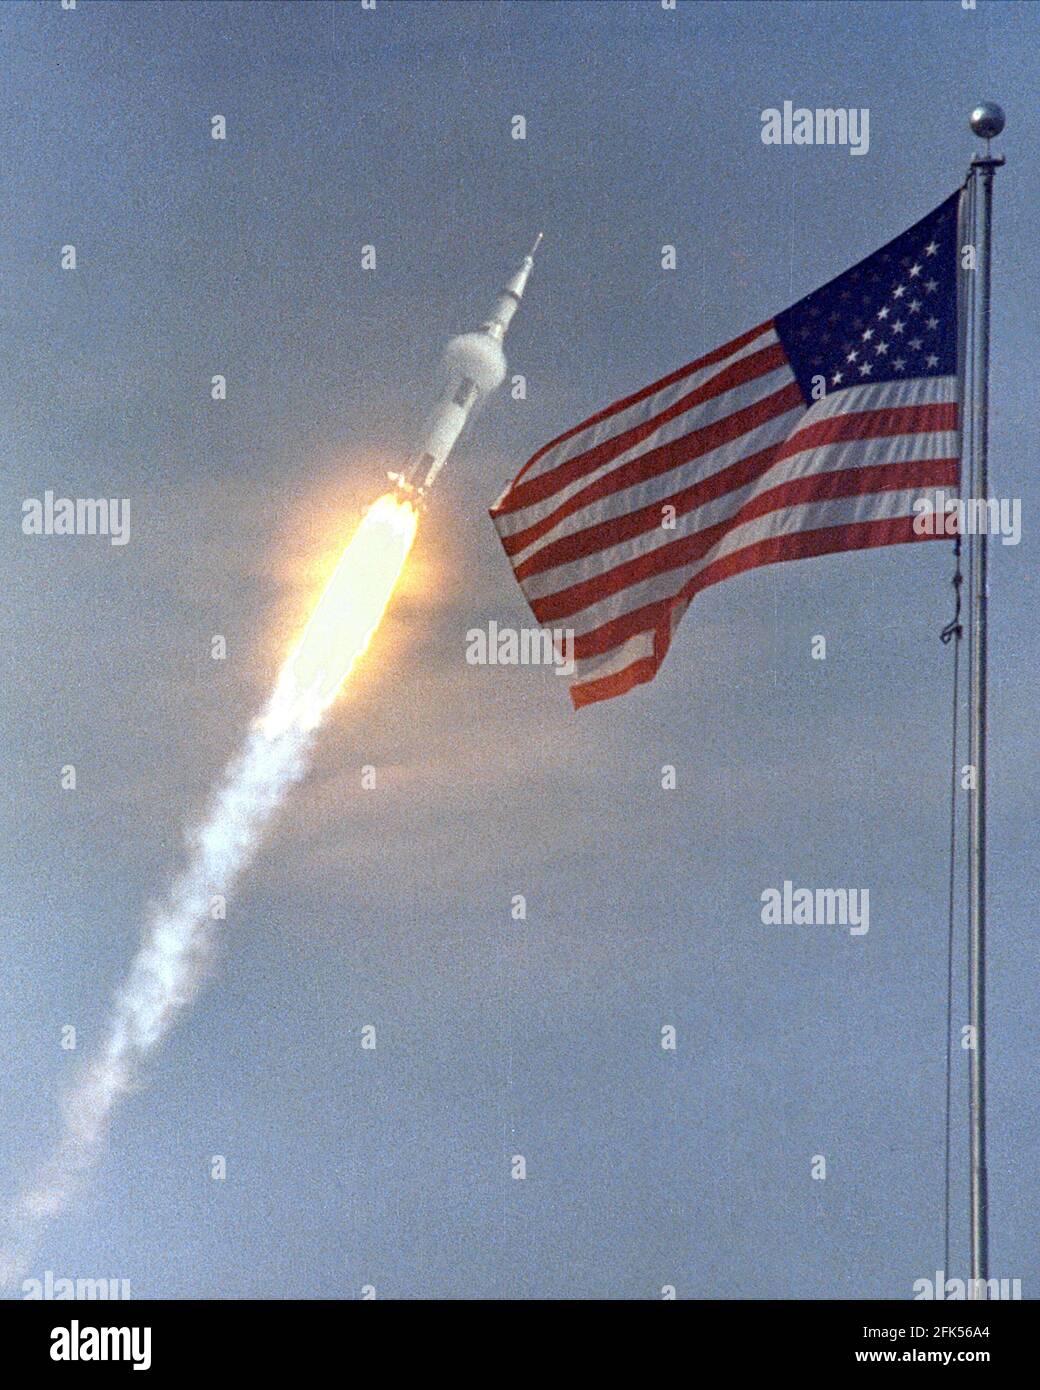 Cape Canaveral, FL - (FILE) -- The American flag heralds the flight of Apollo 11, the first Lunar landing mission. The Apollo 11 Saturn V space vehicle lifted off with astronauts Neil A. Armstrong, Michael Collins and Edwin E. Aldrin, Jr., at 9:32 a.m. EDT July 16, 1969, from Kennedy Space Center's Launch Complex 39A. During the planned eight-day mission, Armstrong and Aldrin will descend in a lunar module to the Moon's surface while Collins orbits overhead in the Command Module. The two astronauts are to spend 22 hours on the Moon, including two and one-half hours outside the lunar module. Th Stock Photo